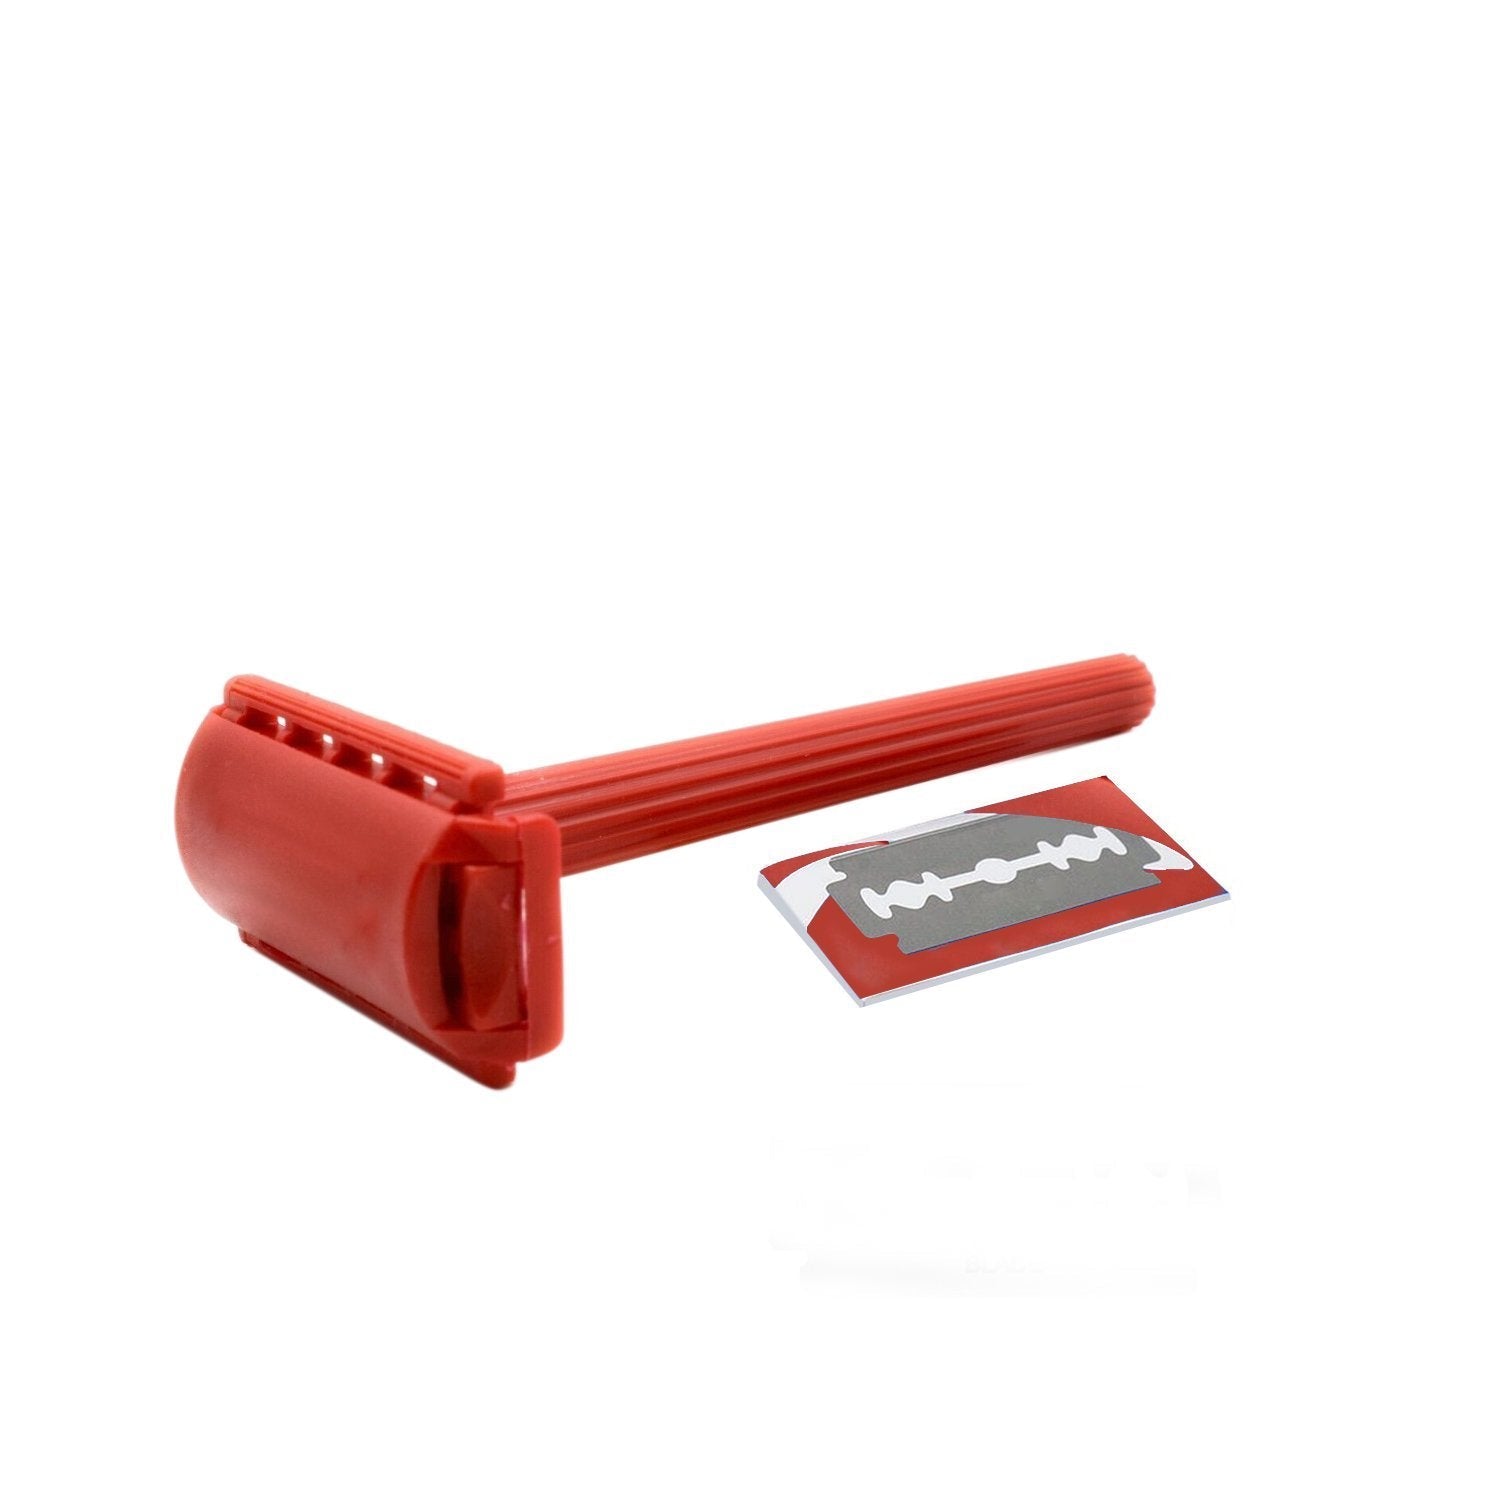 6008 Shaving Razor for Men Blade Razor with Plastic Grip Handle (With Card Packing) 